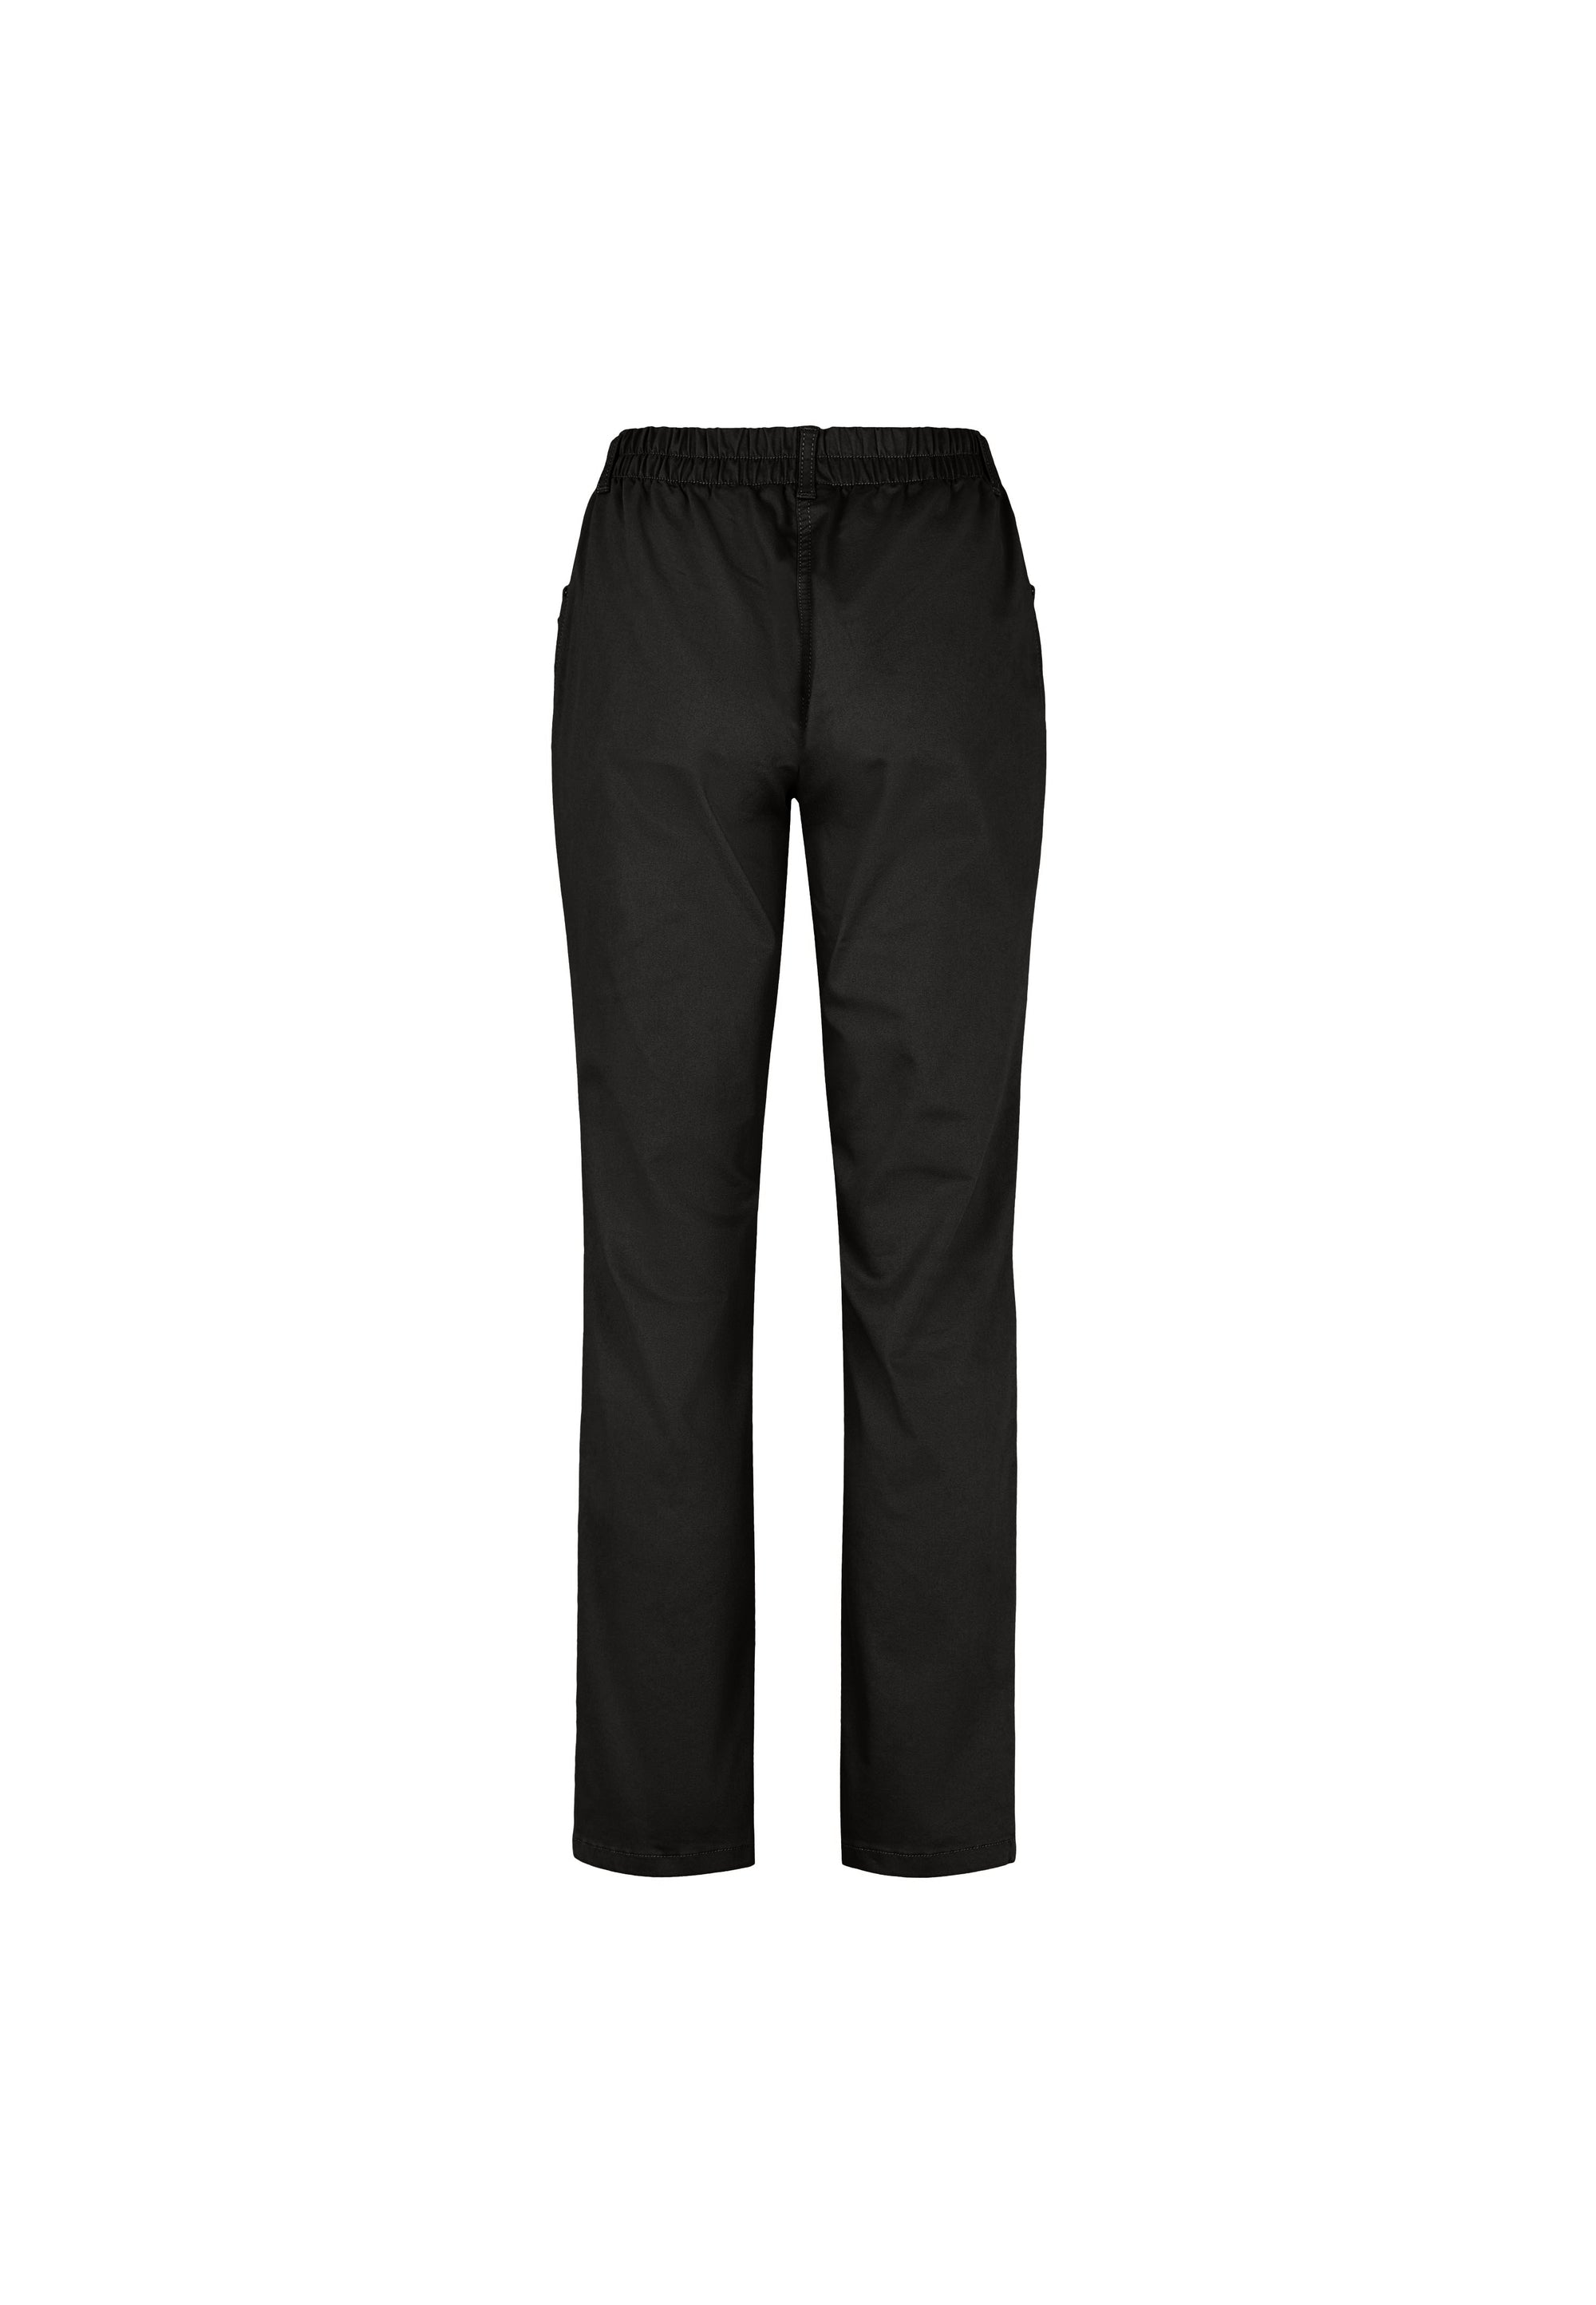 LAURIE Violet Relaxed - Medium Length Trousers RELAXED 99000 Black